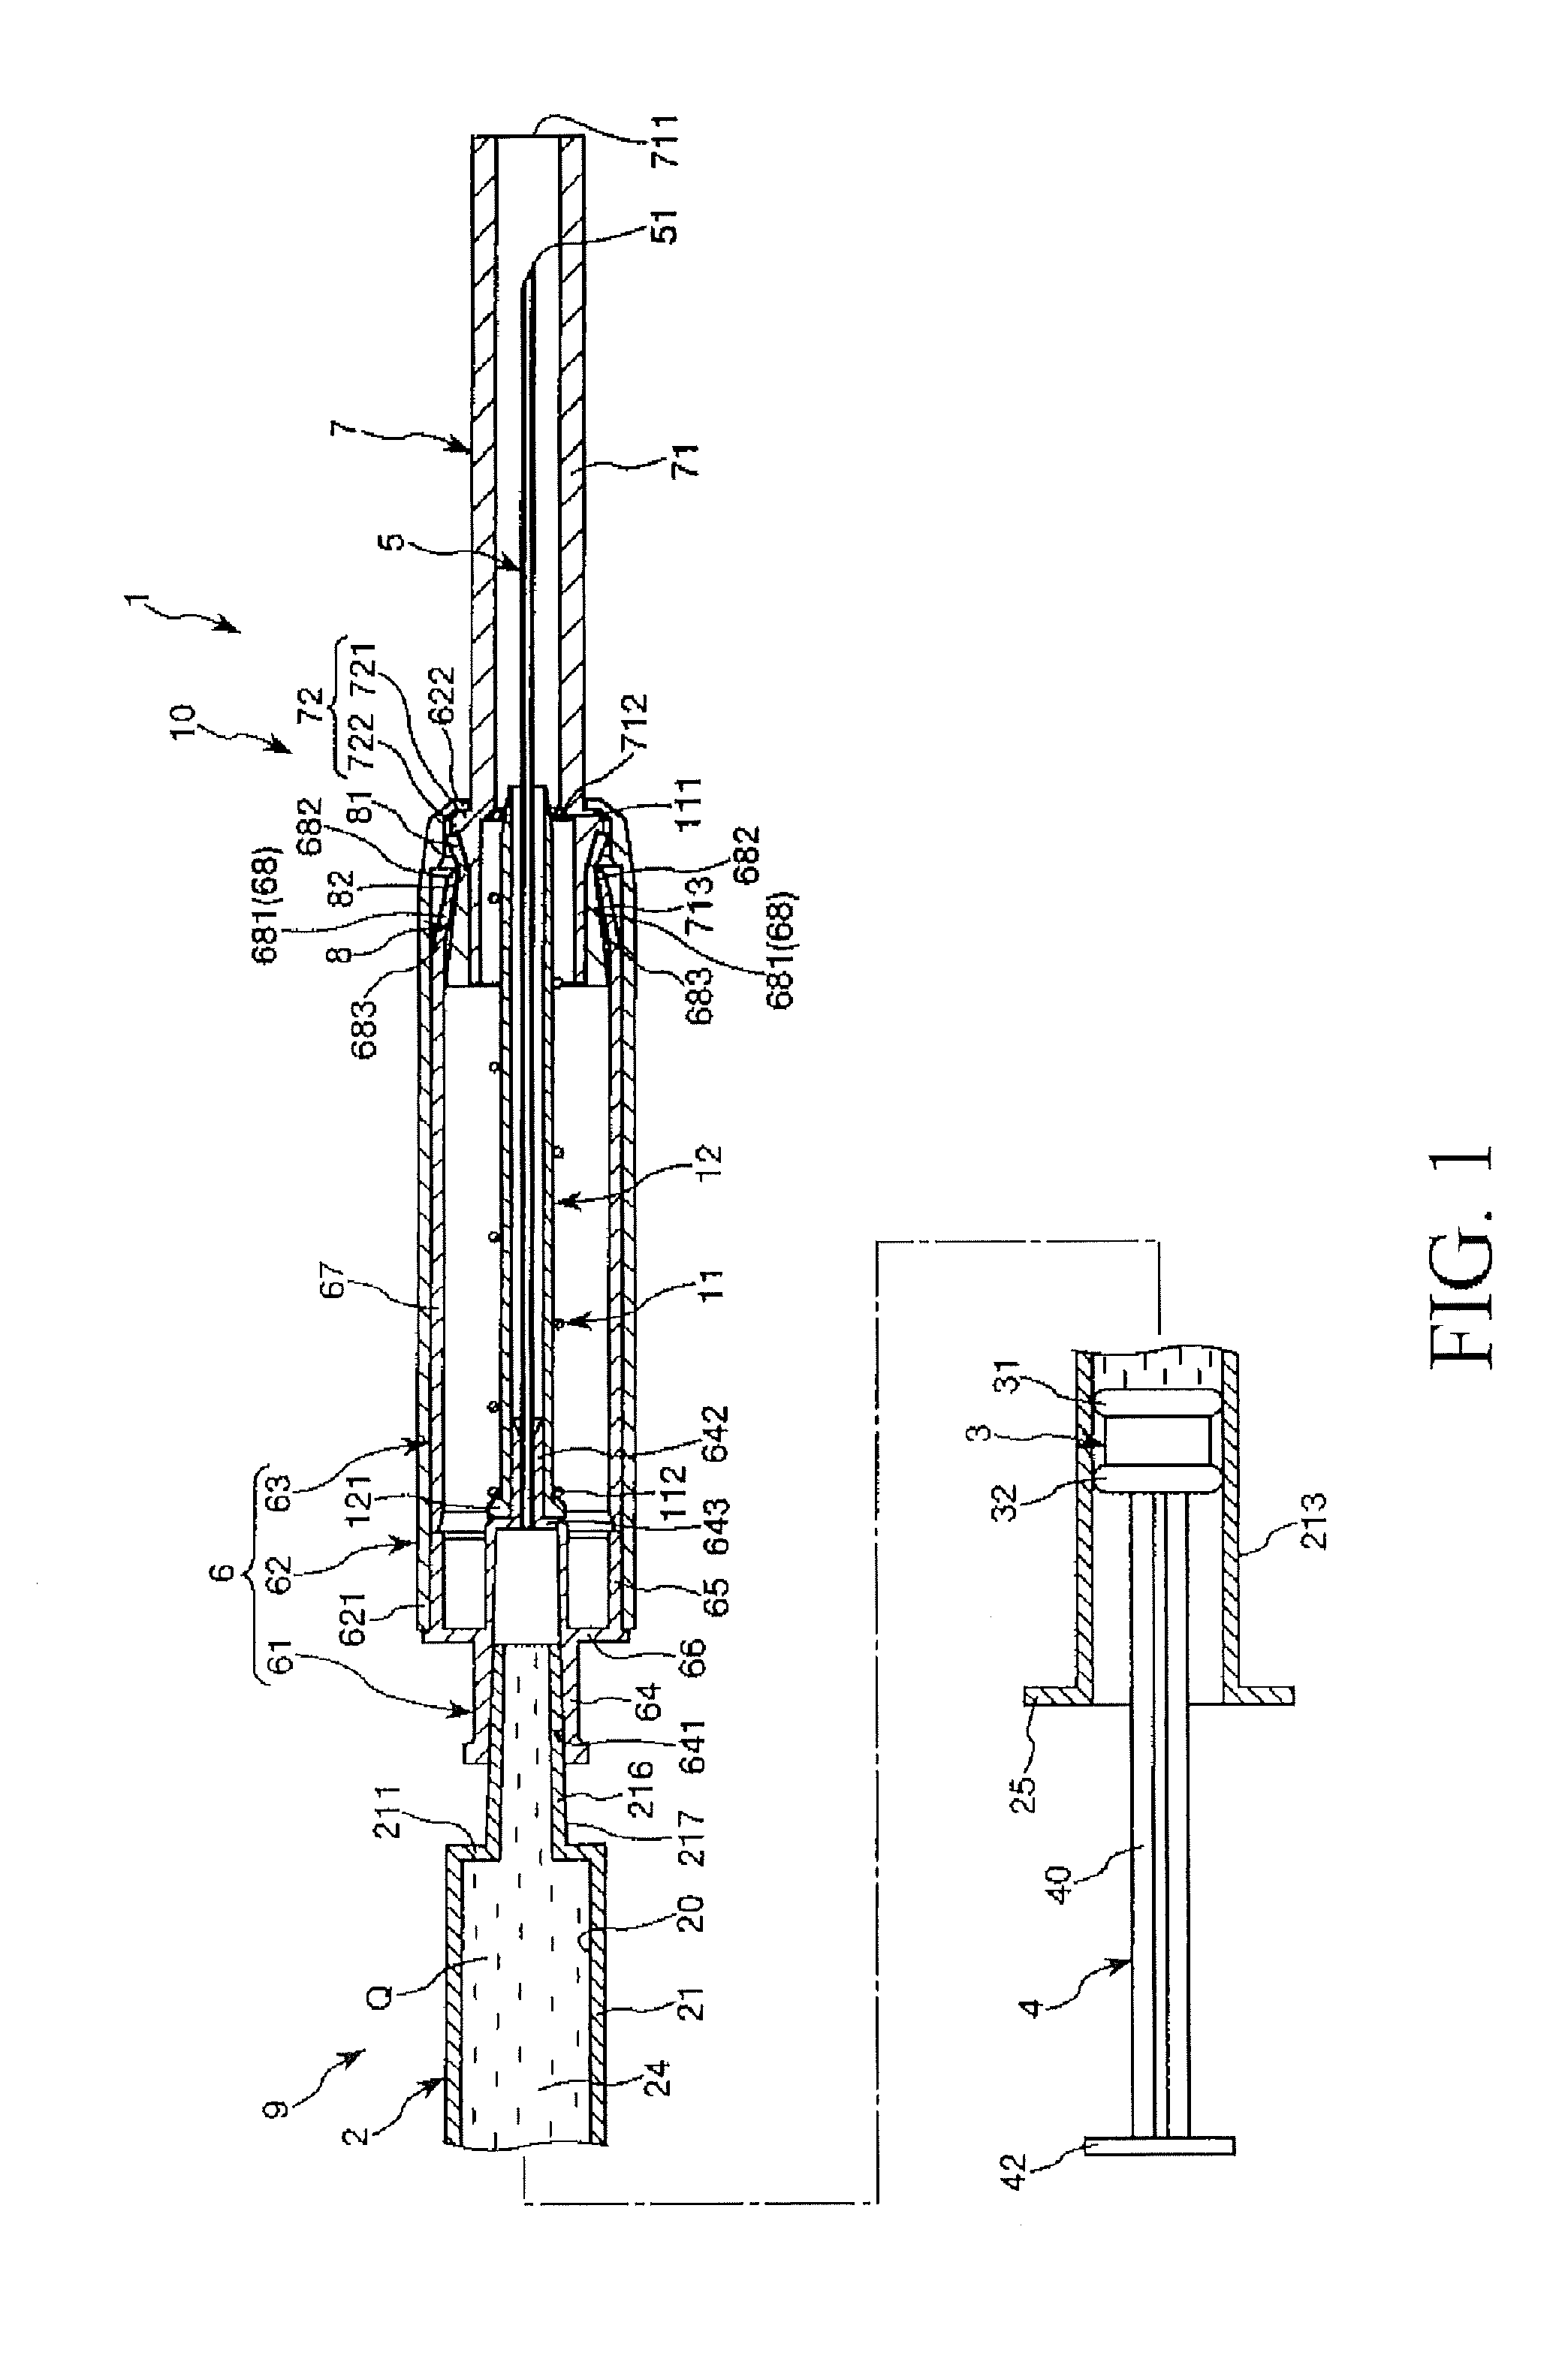 Puncture needle assembly and medicinal liquid injector